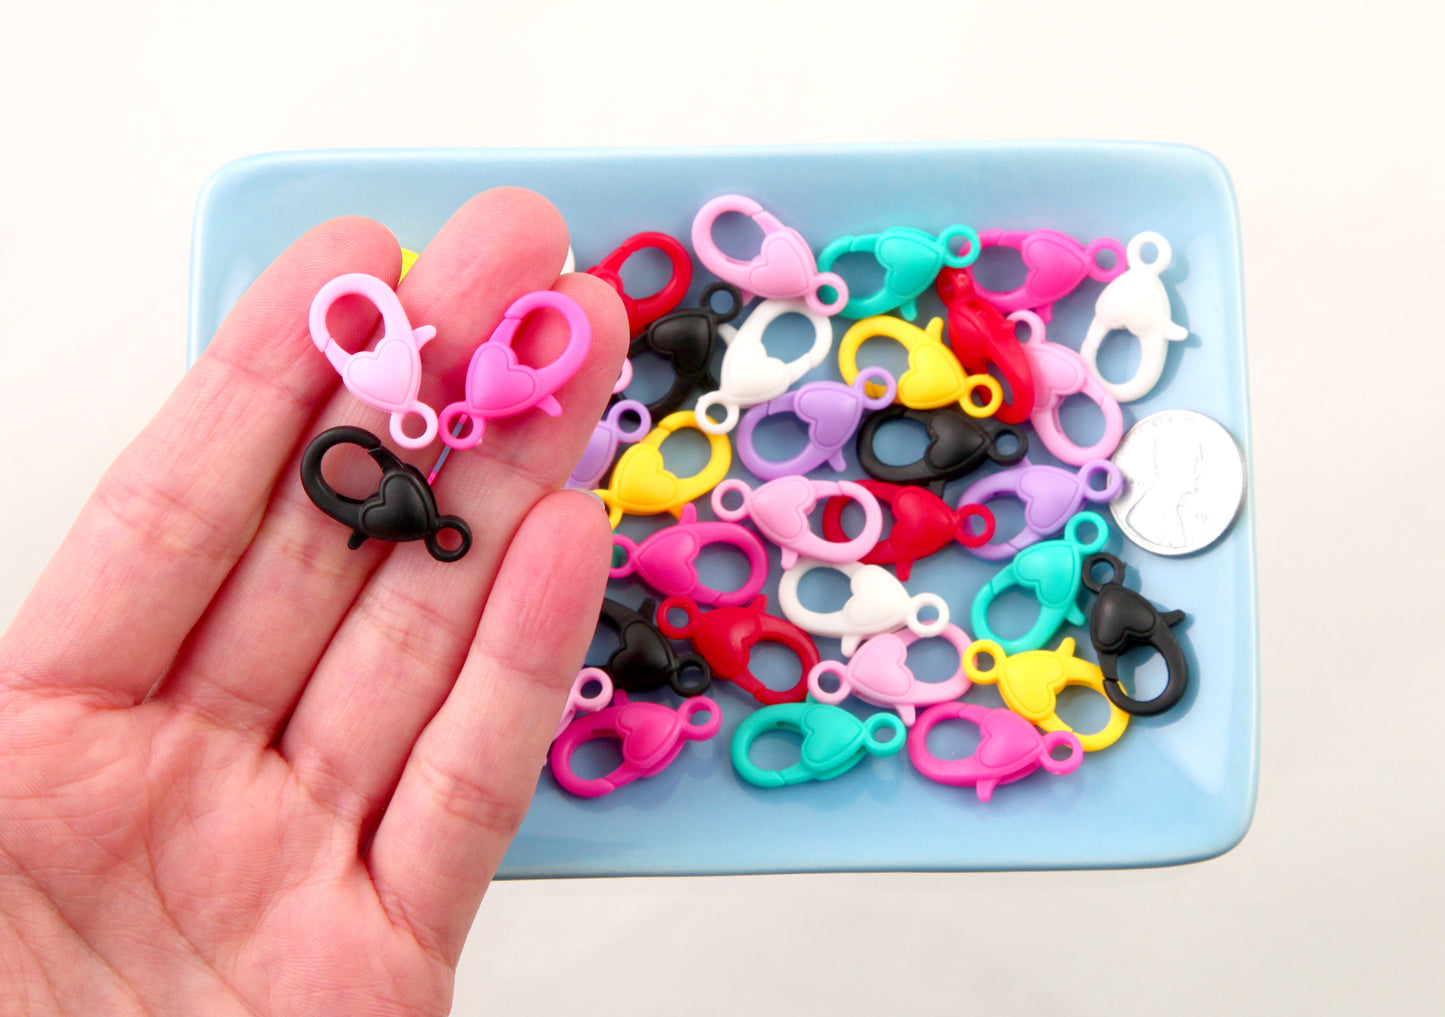 Small Plastic Lobster Clasp - 18 pcs - 23mm Colorful Plastic Clasp with Heart or Keychain Clip